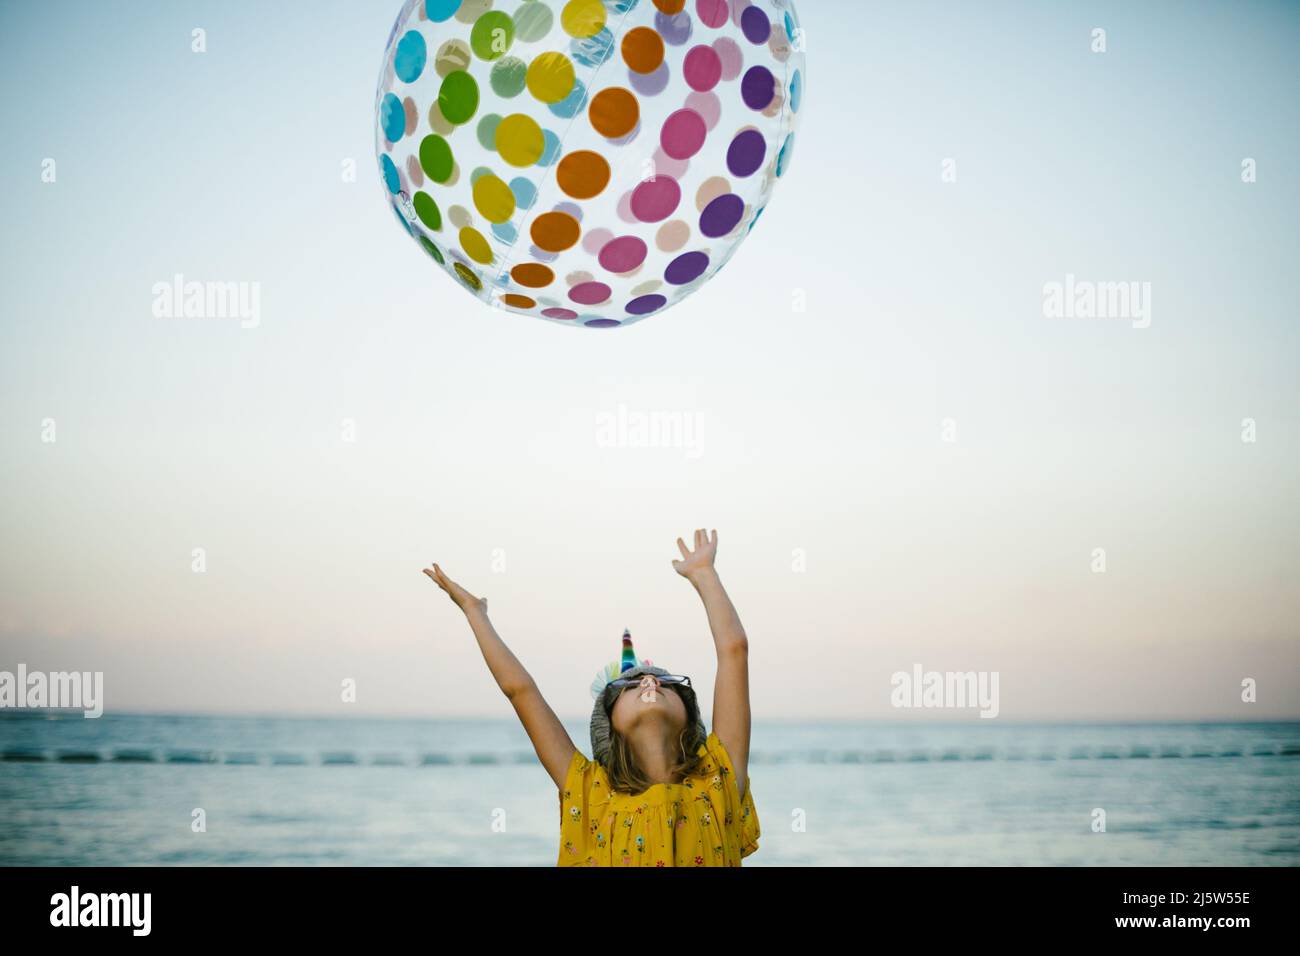 Blond seven year old girl throws rainbow ball by the ocean Stock Photo